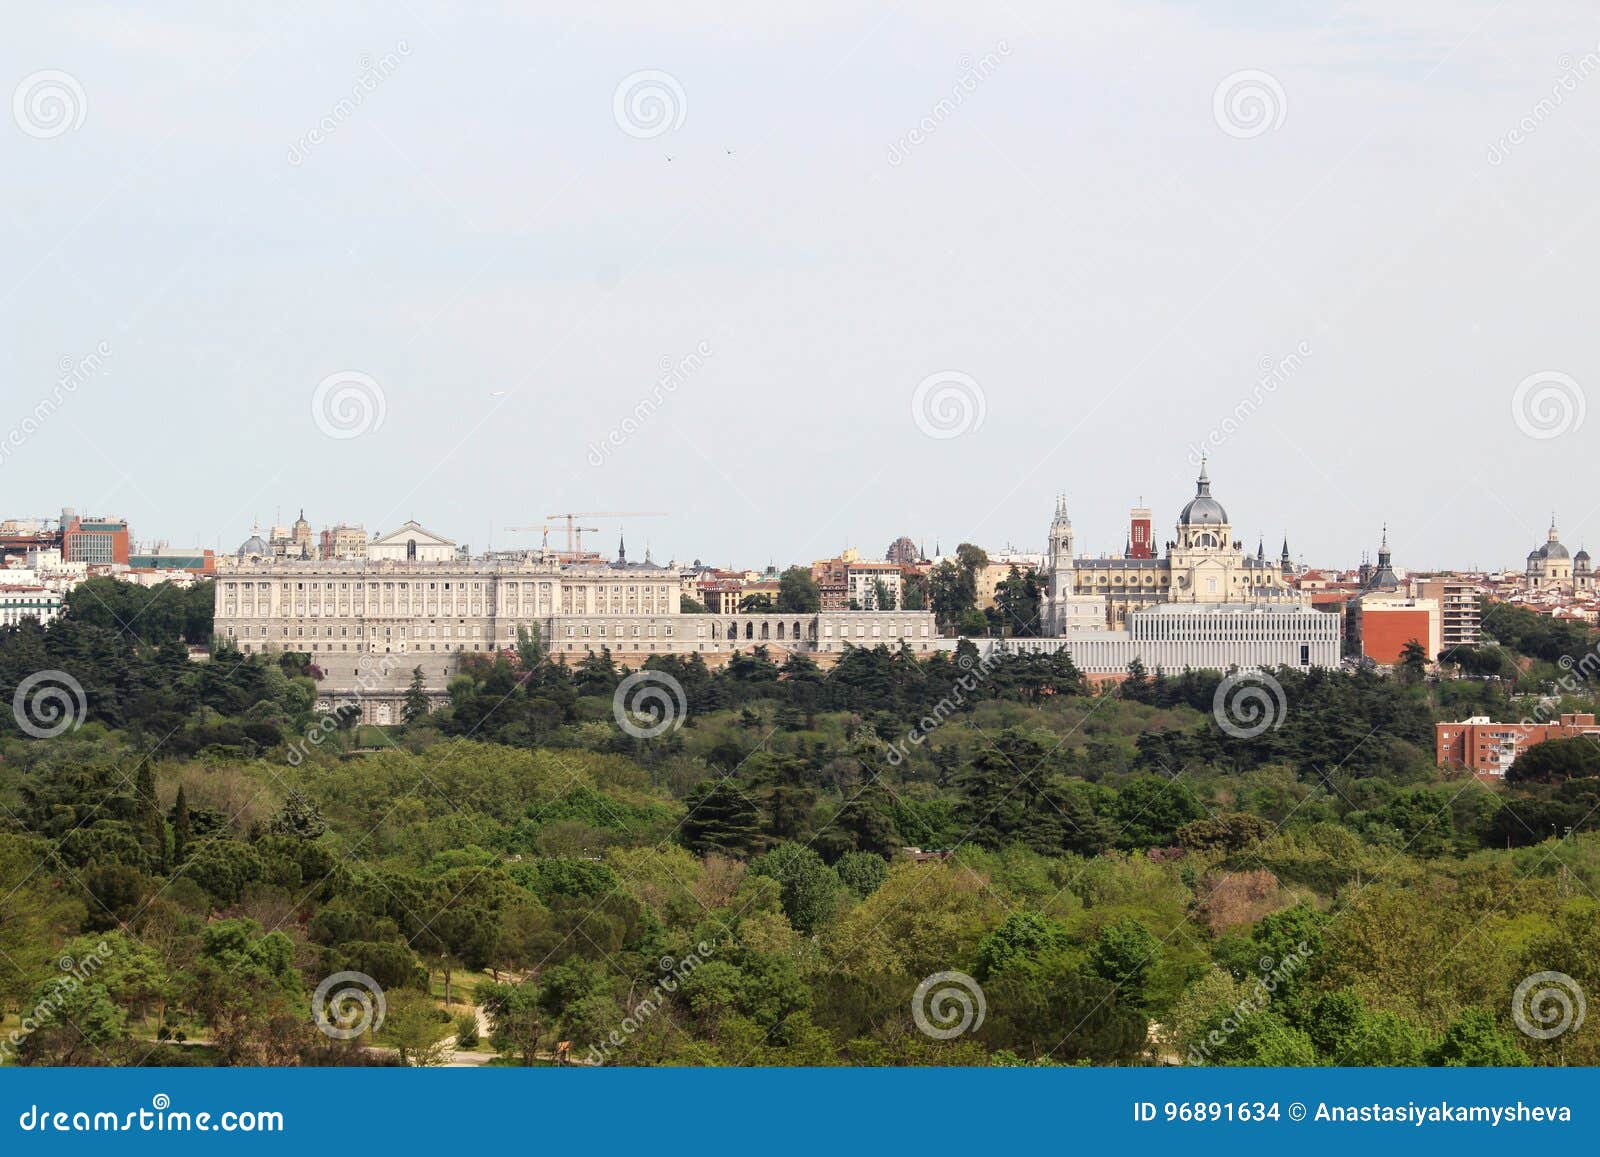 view to the historical center of madrid from casa de campa